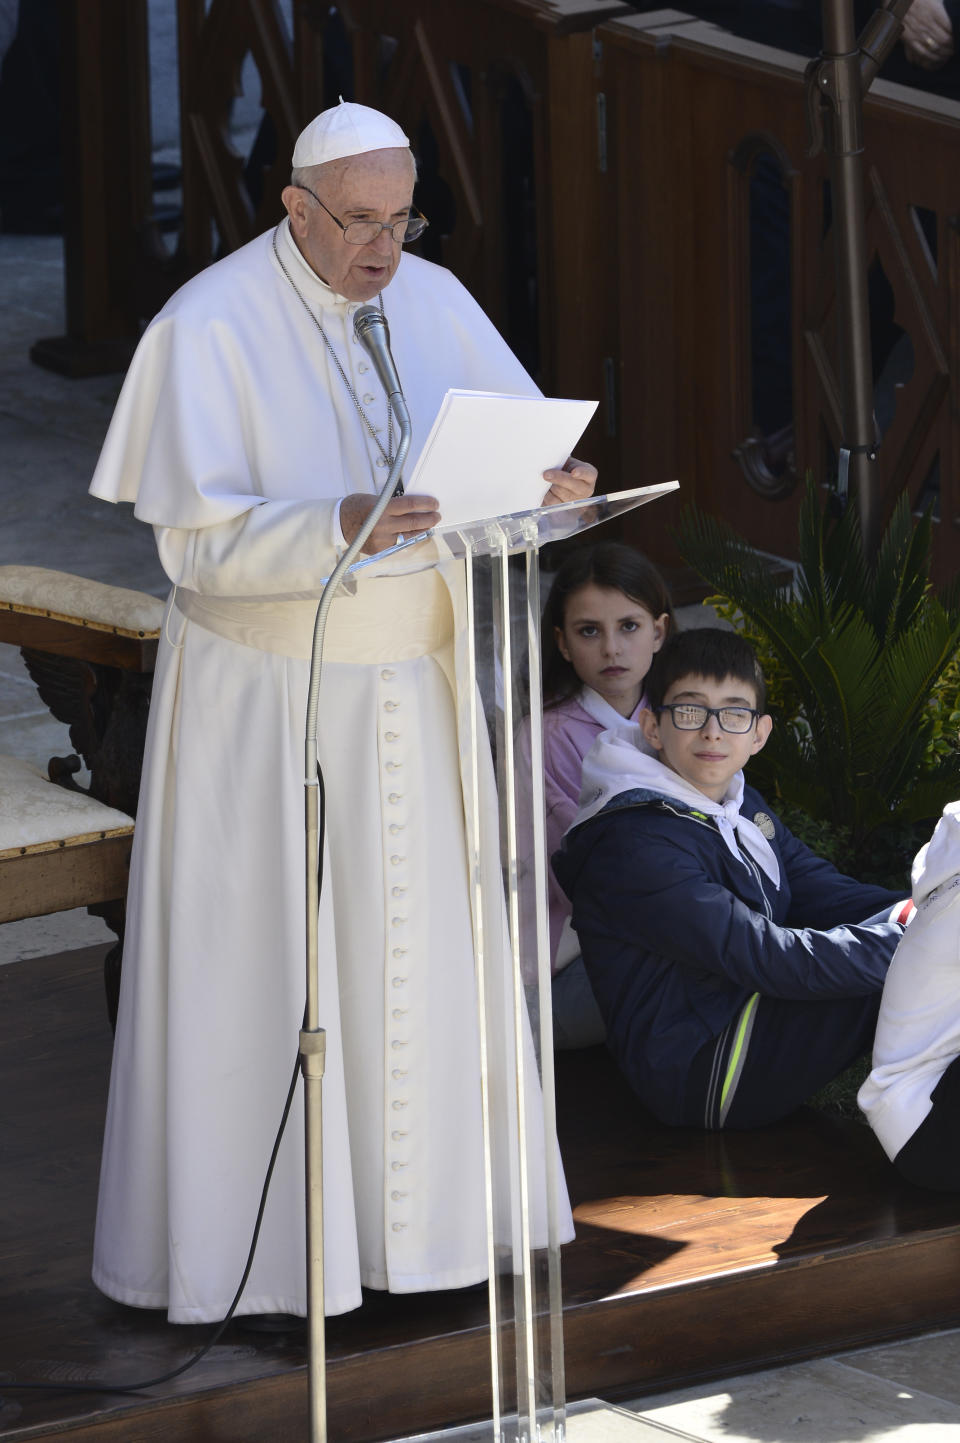 Pope Francis delivers his message at Loreto's cathedral, central Italy, Monday, March 25, 2019. Francis has traveled to a major Italian pilgrimage site dedicated to the Virgin Mary to sign a new document dedicated to today's youth. (AP Photo/Sandro Perozzi)